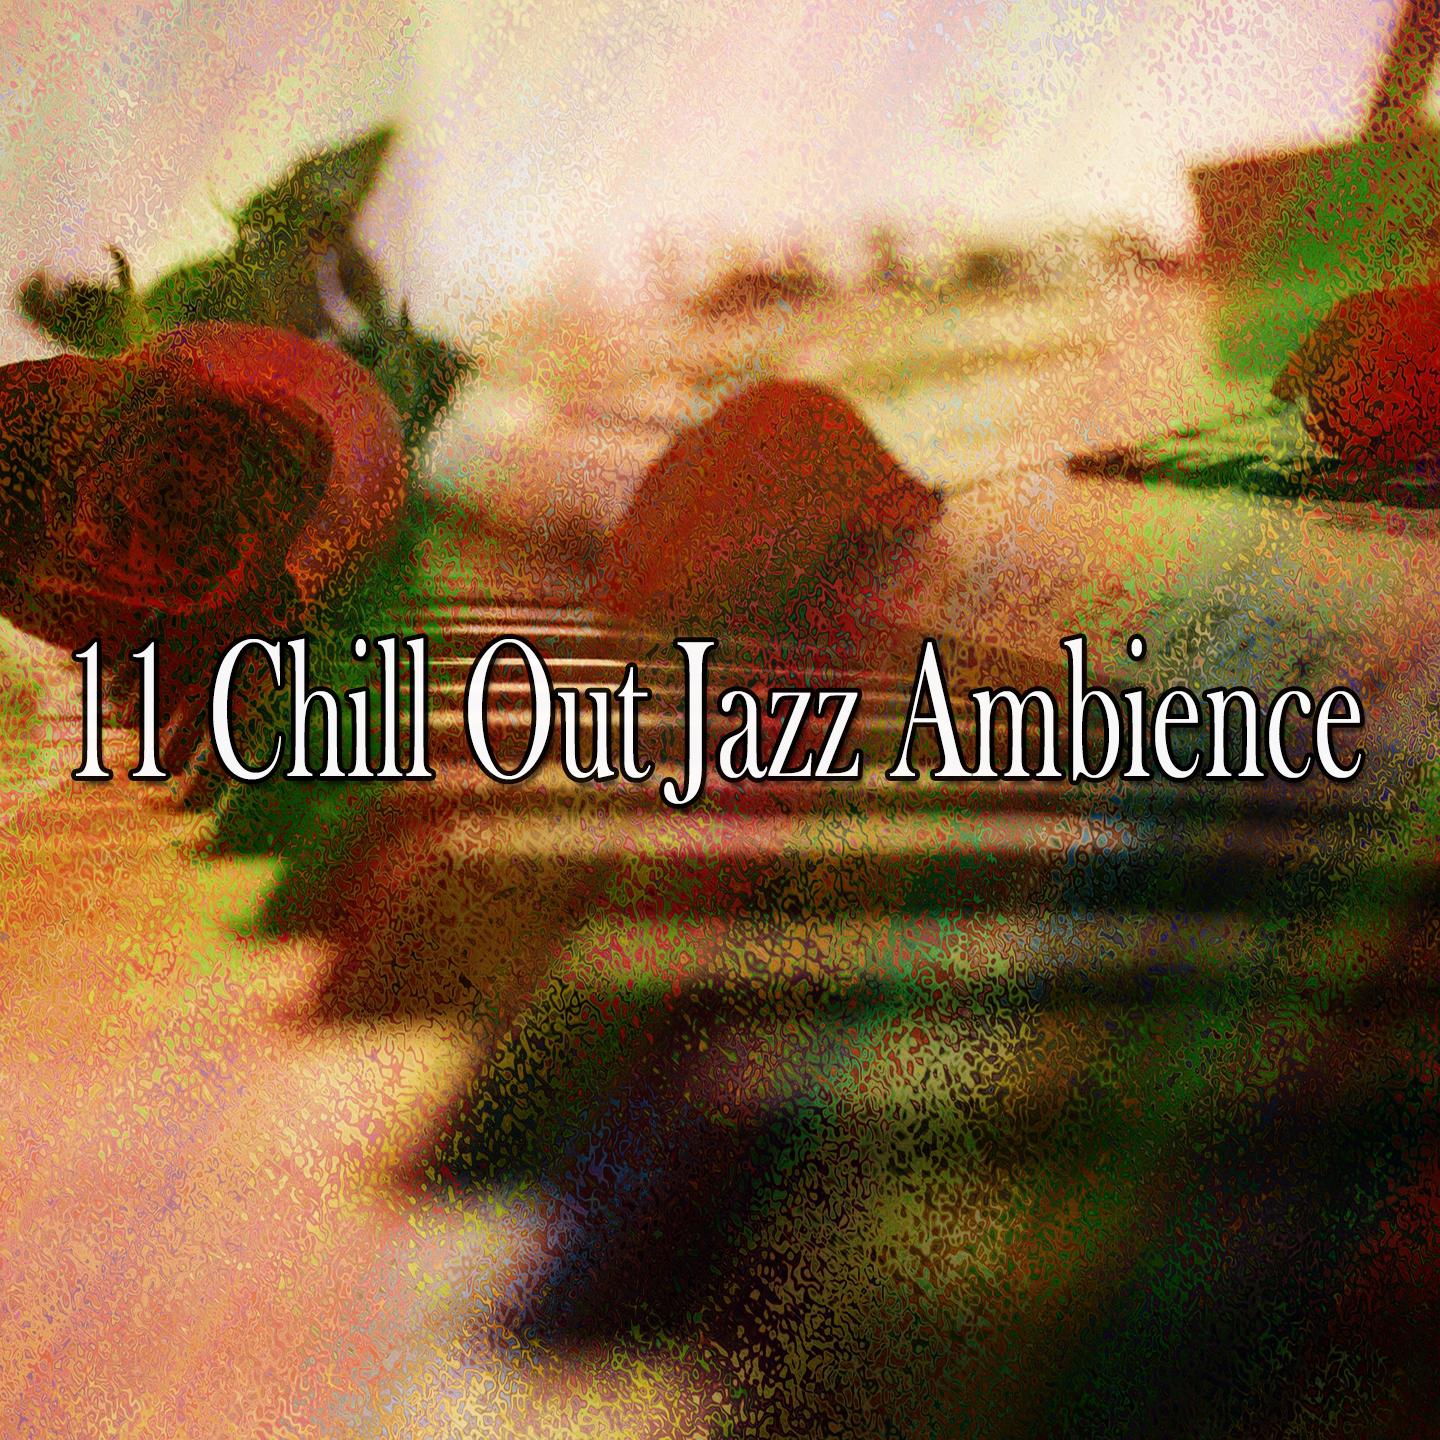 11 Chill out Jazz Ambience